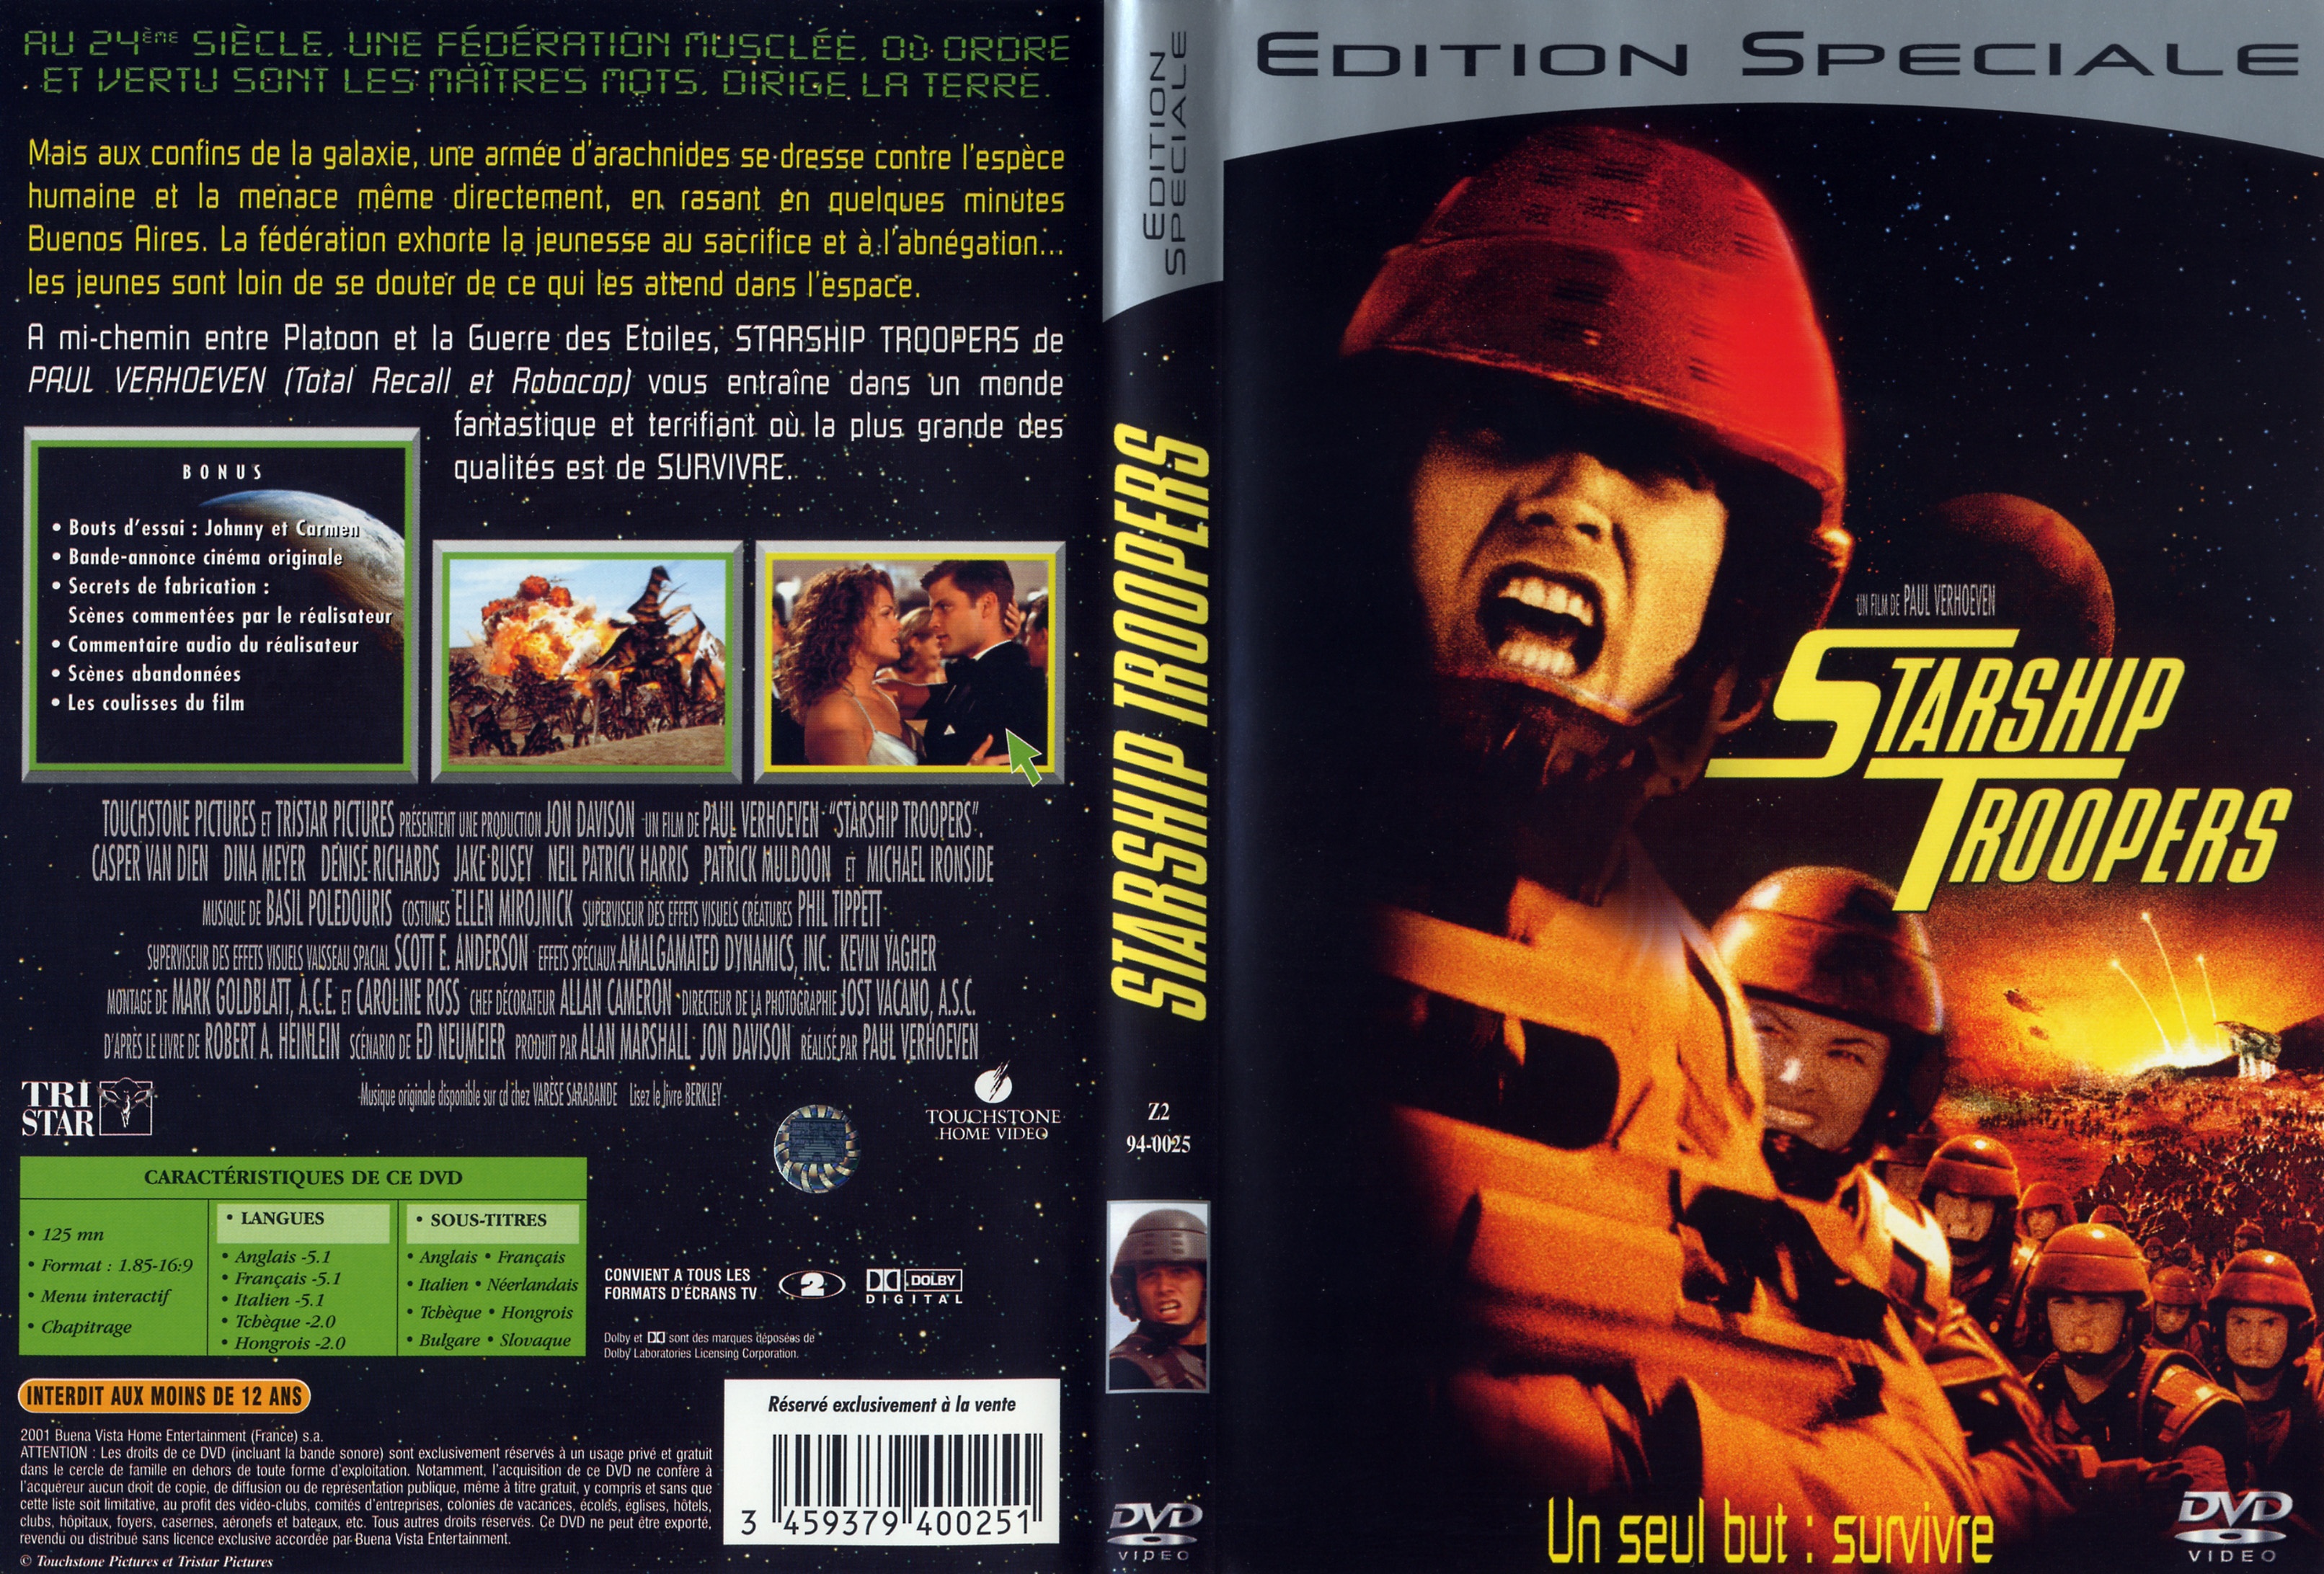 Jaquette DVD Starship troopers